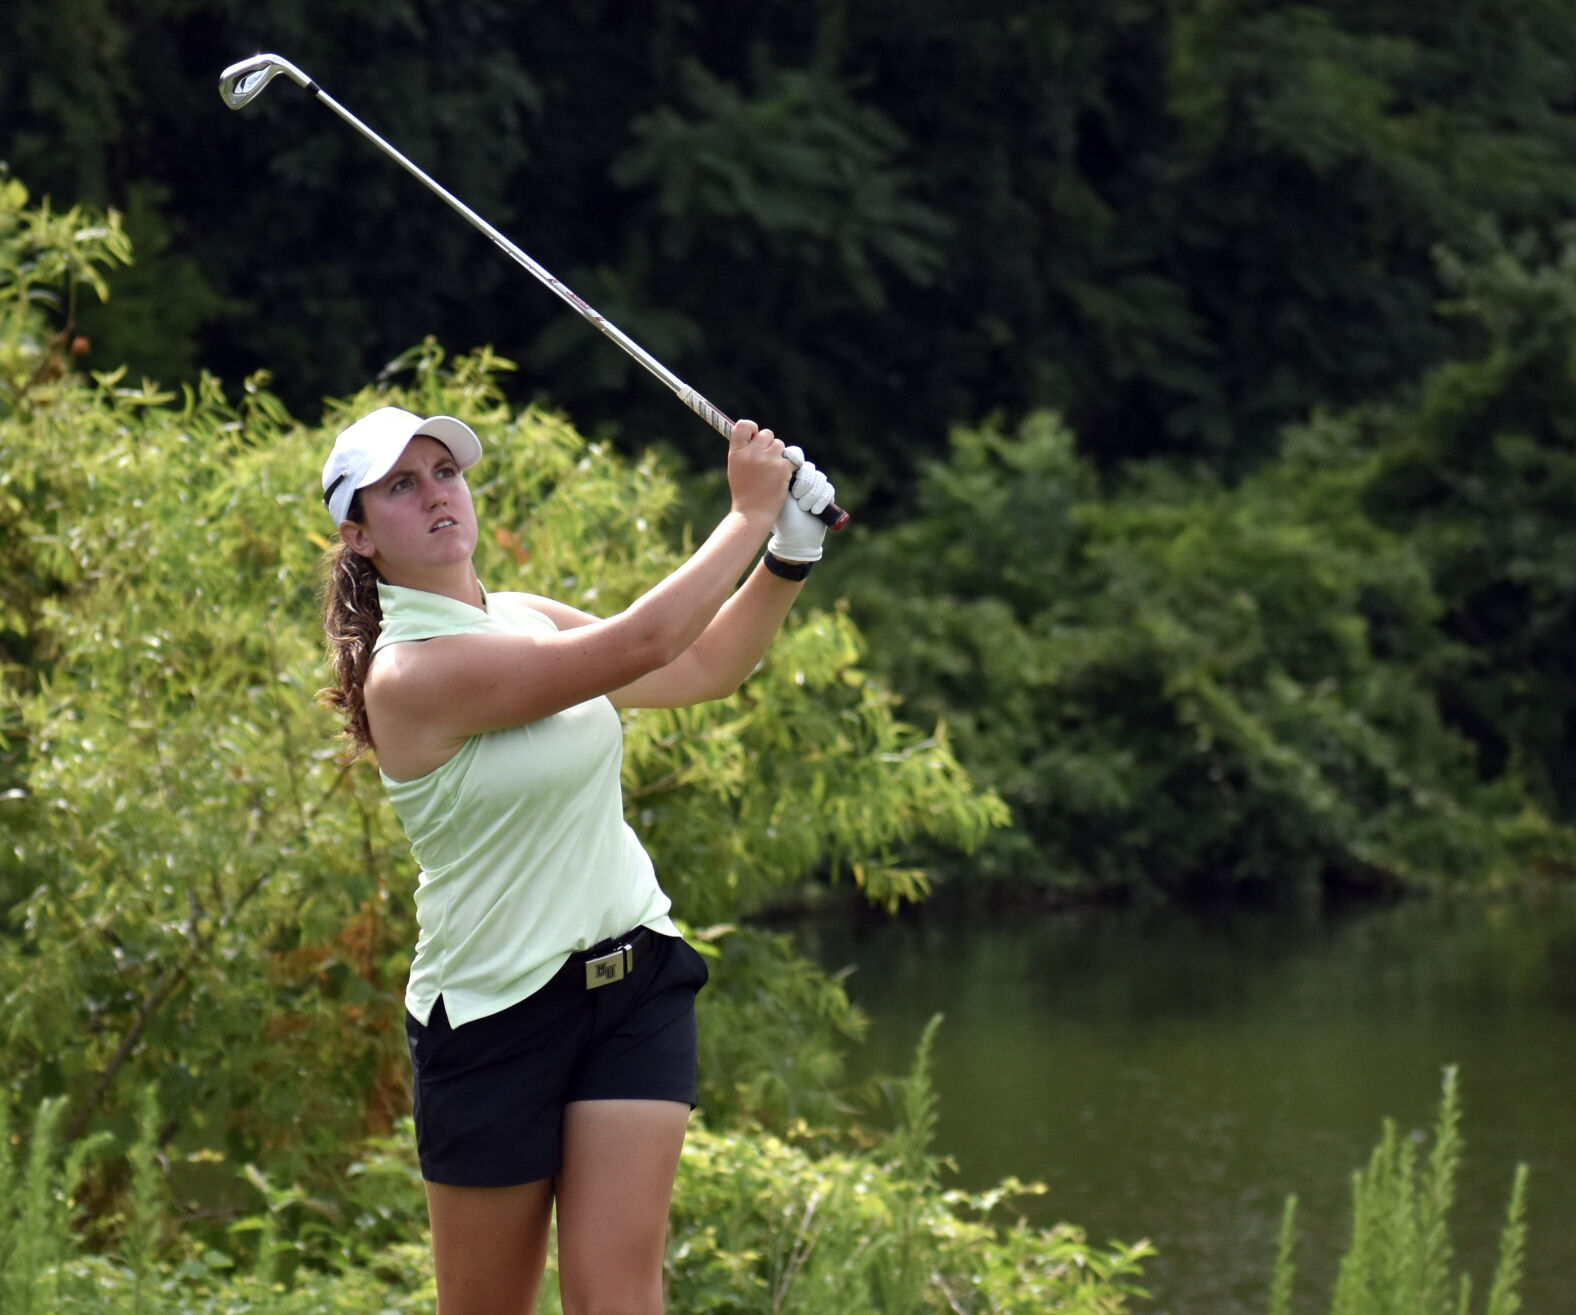 Region roundup Drinkard falls to Turner in state am quarterfinals, and more image pic